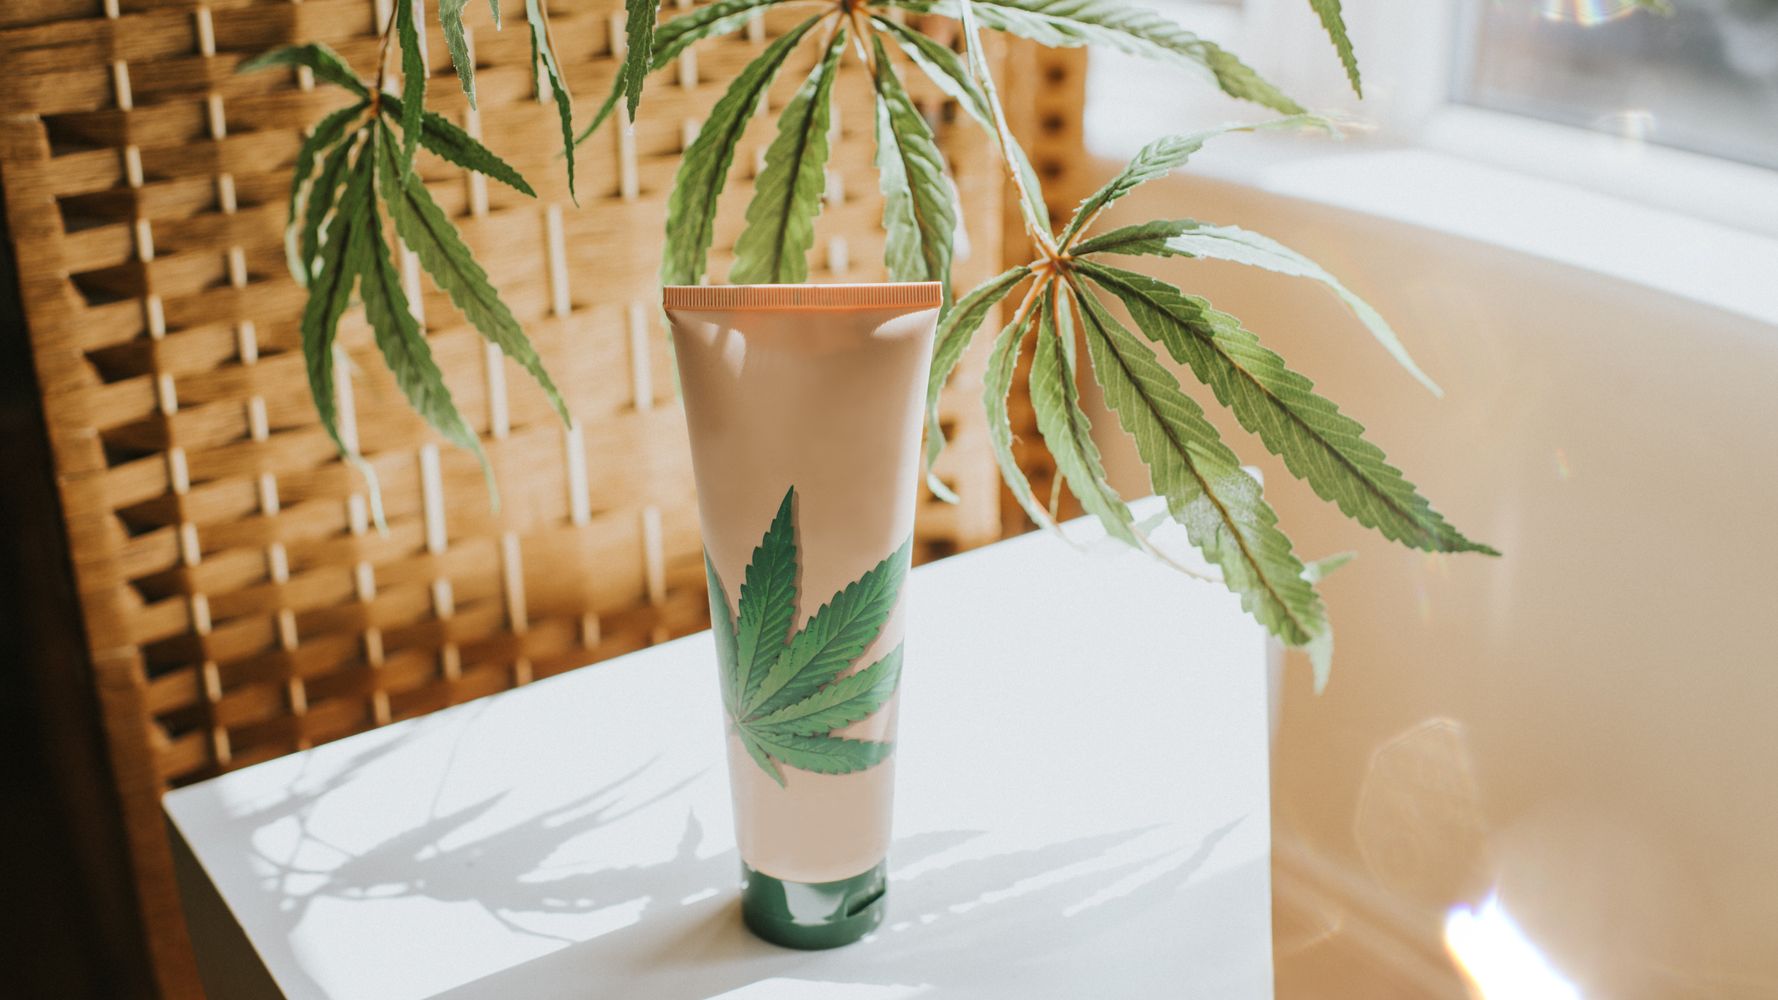 Do CBD Shampoos Actually Work? Here's What Experts Say.